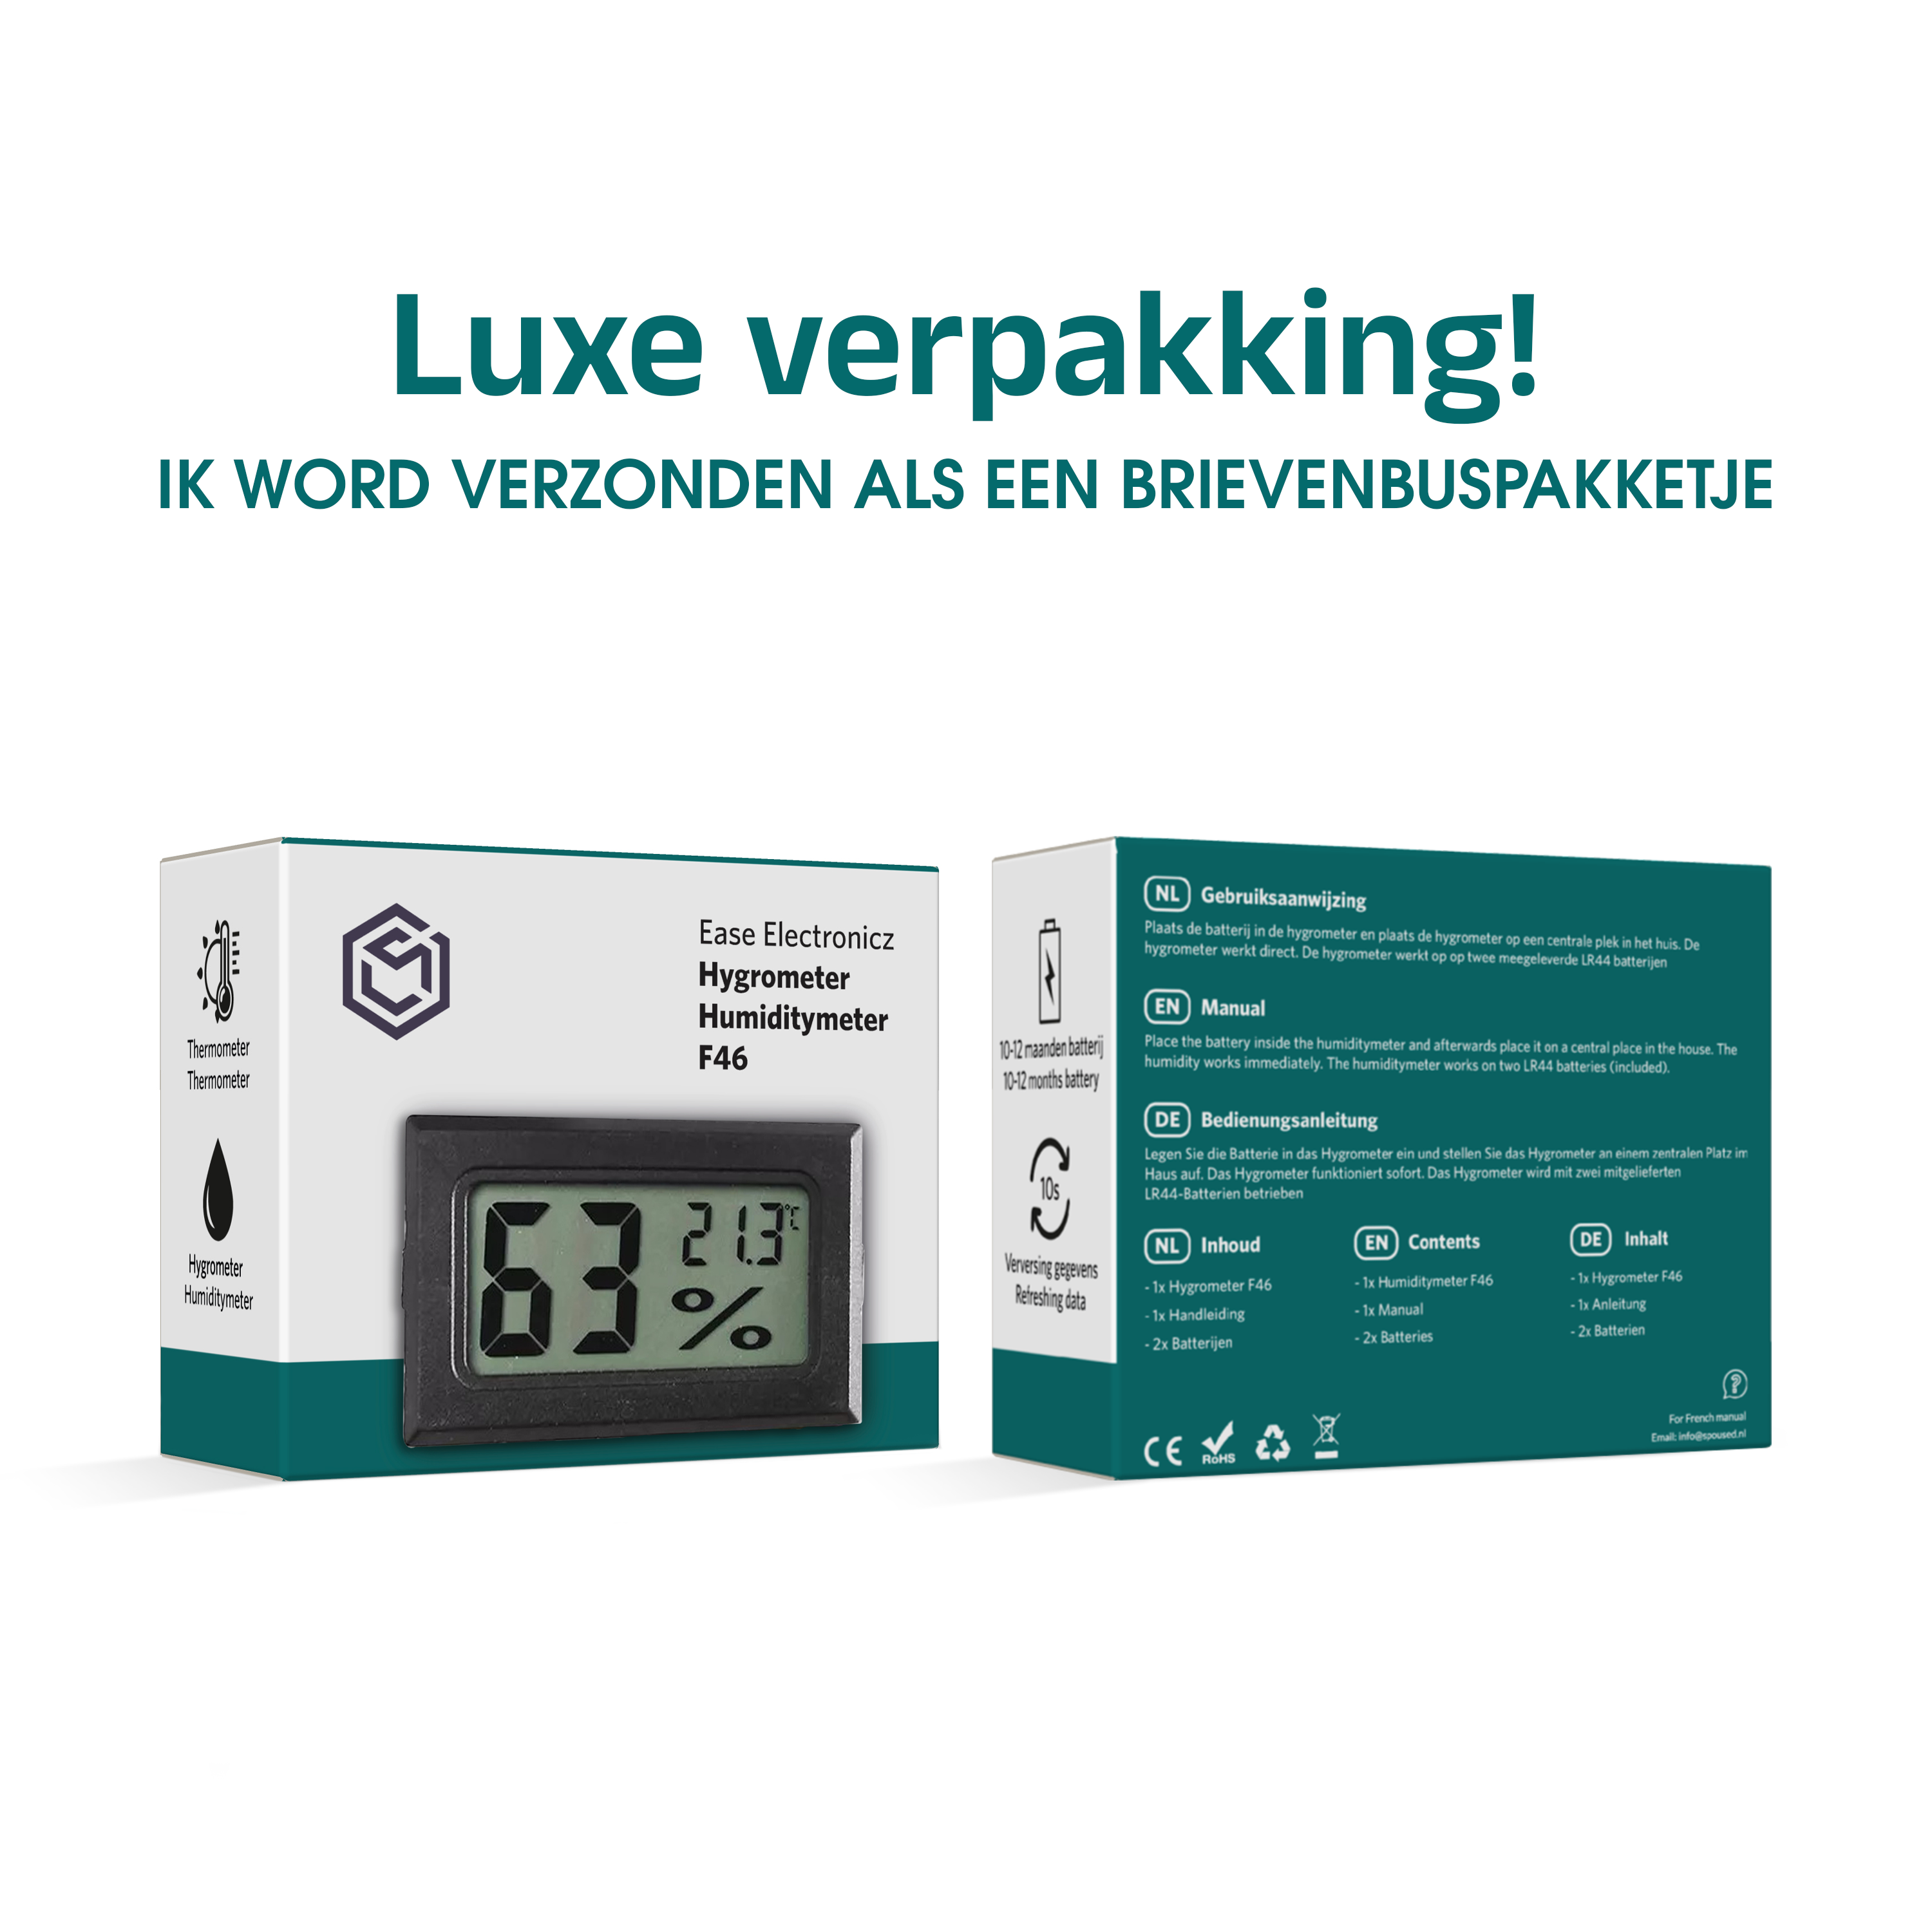 Ease Electronicz hygrometer verpakking